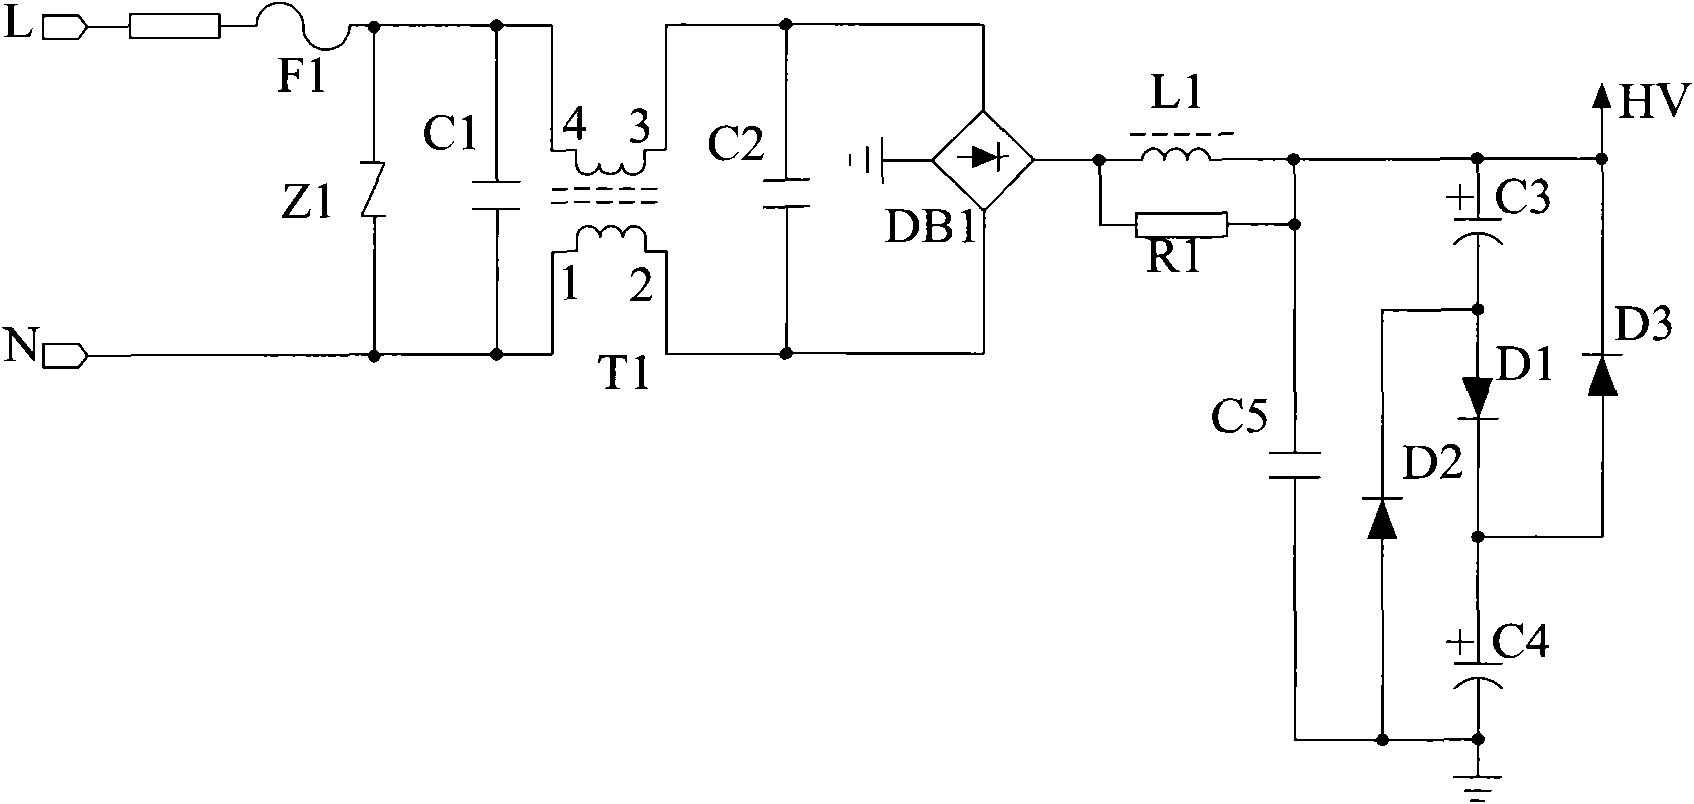 LED switch power supply capable of dimming